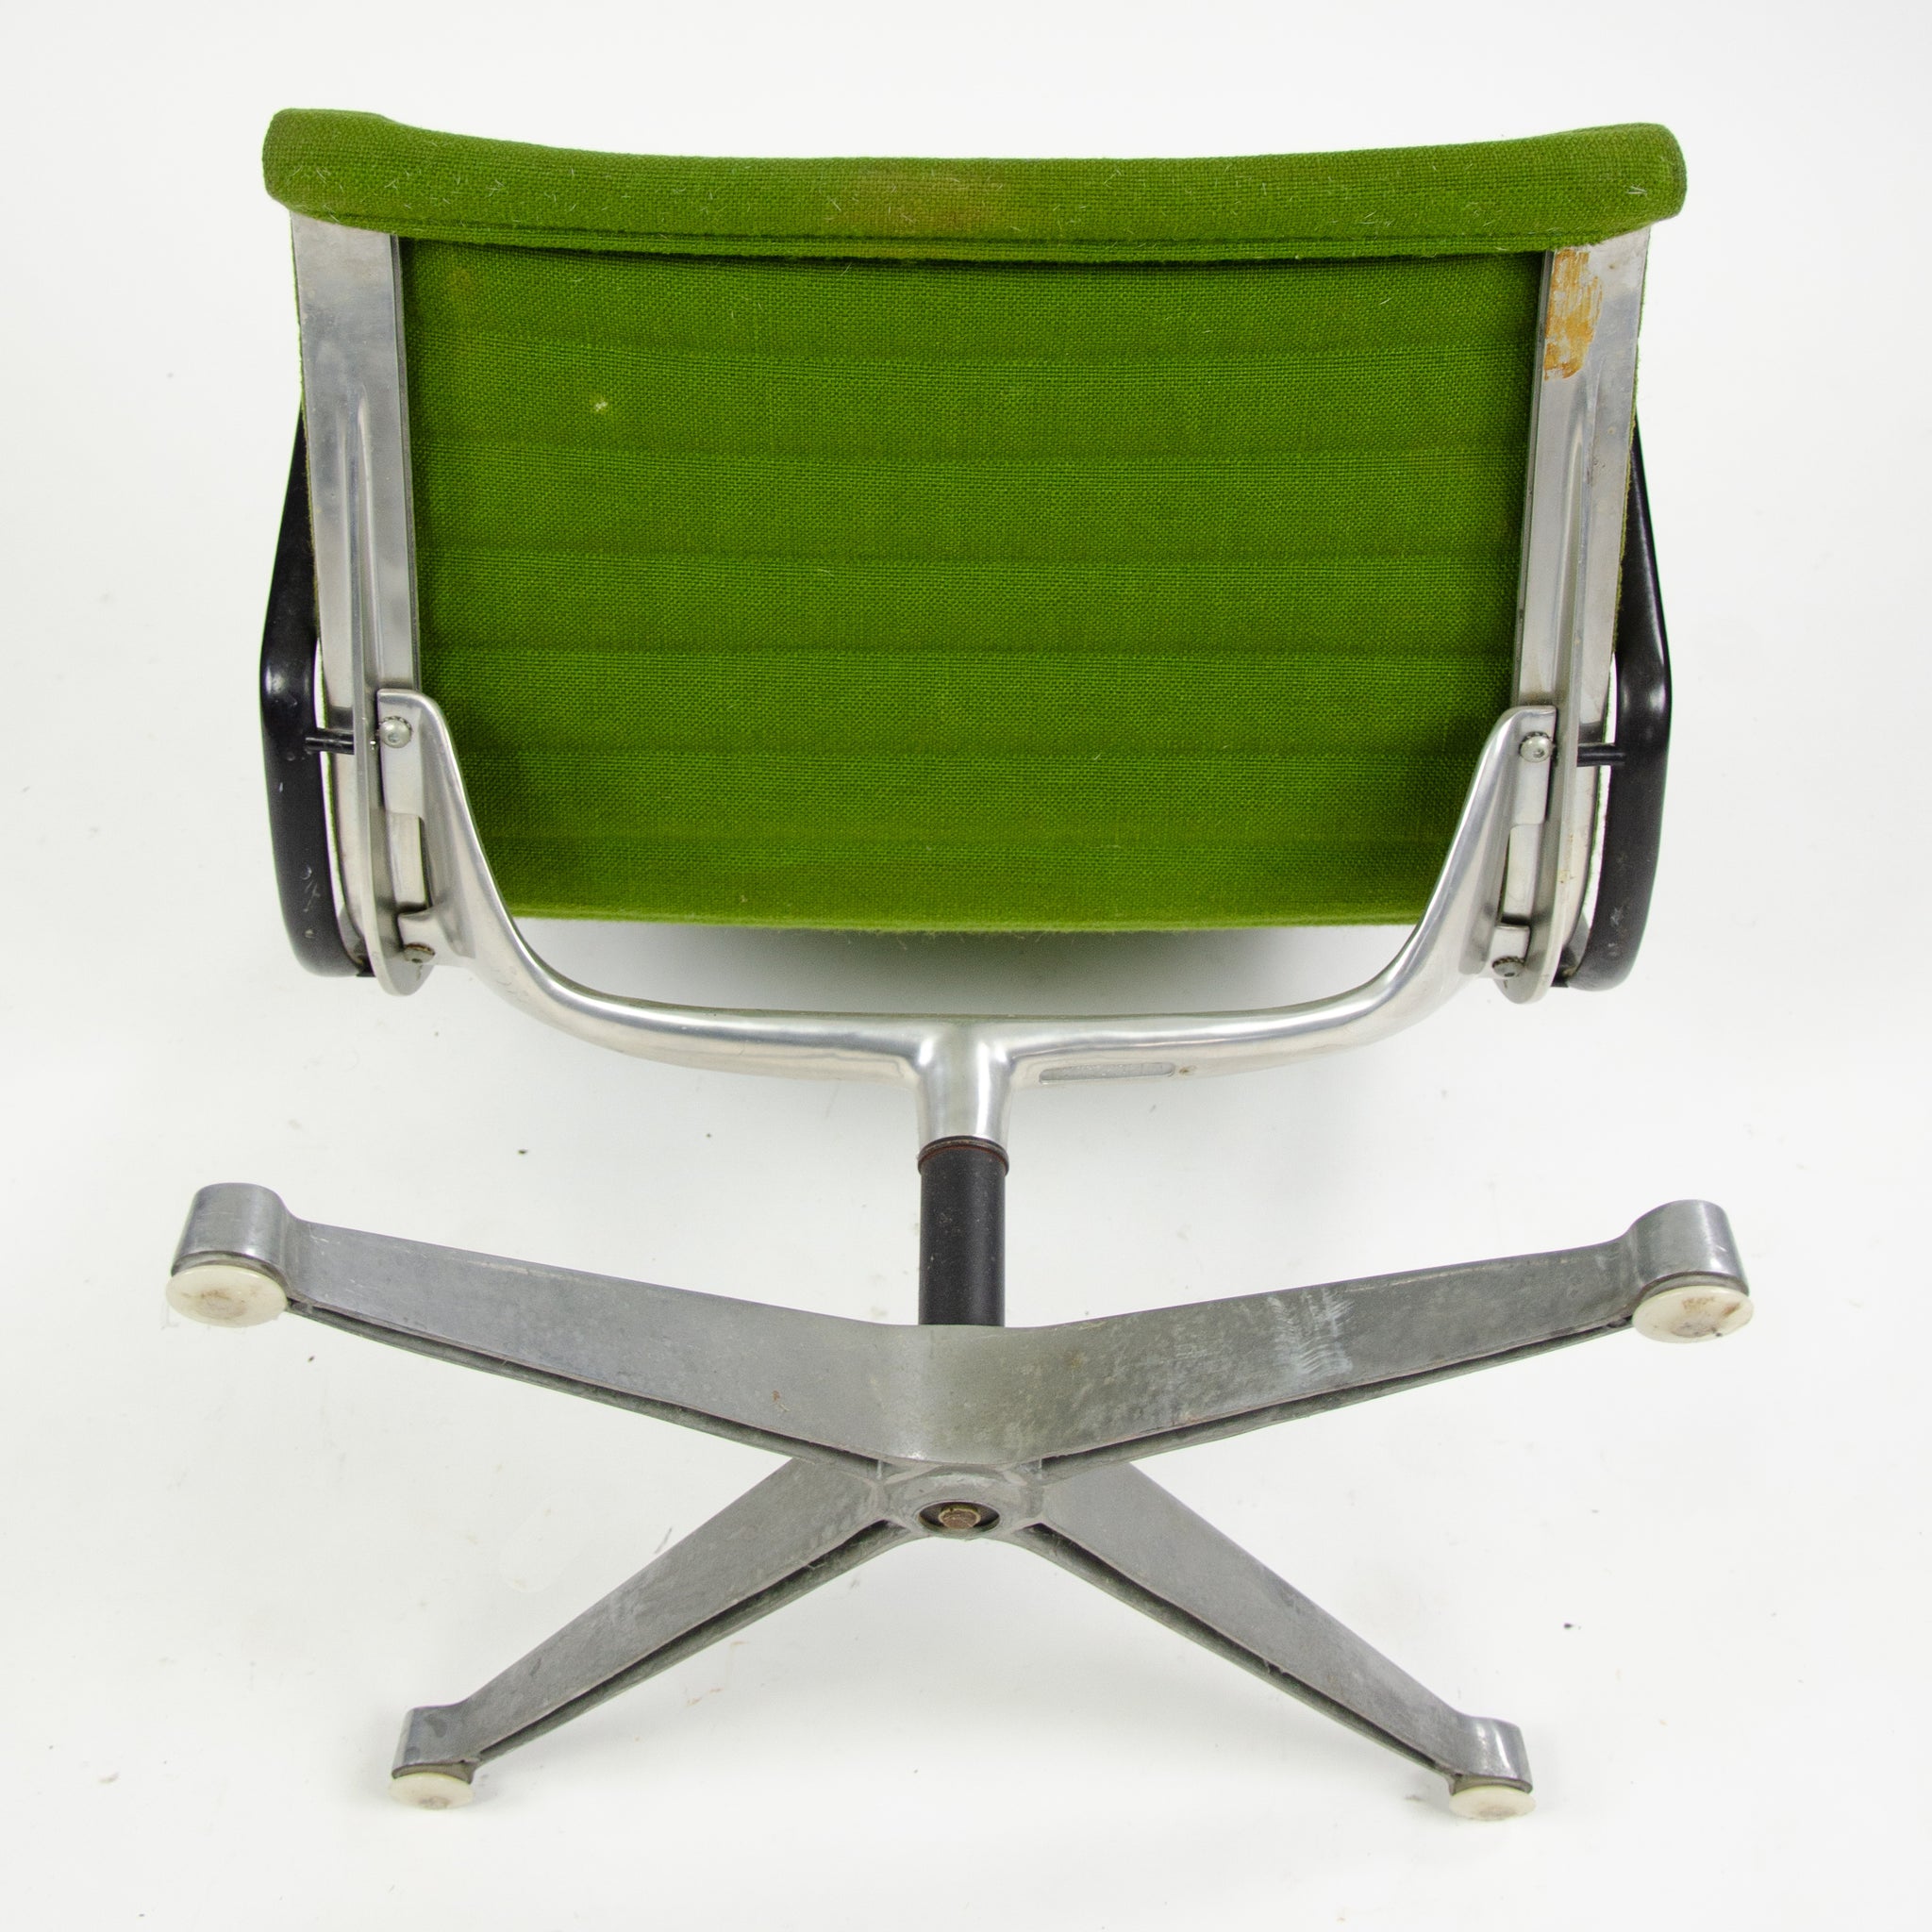 SOLD 1960's Green Eames Herman Miller Aluminum Group Lounge Chair, Fabric Upholstery